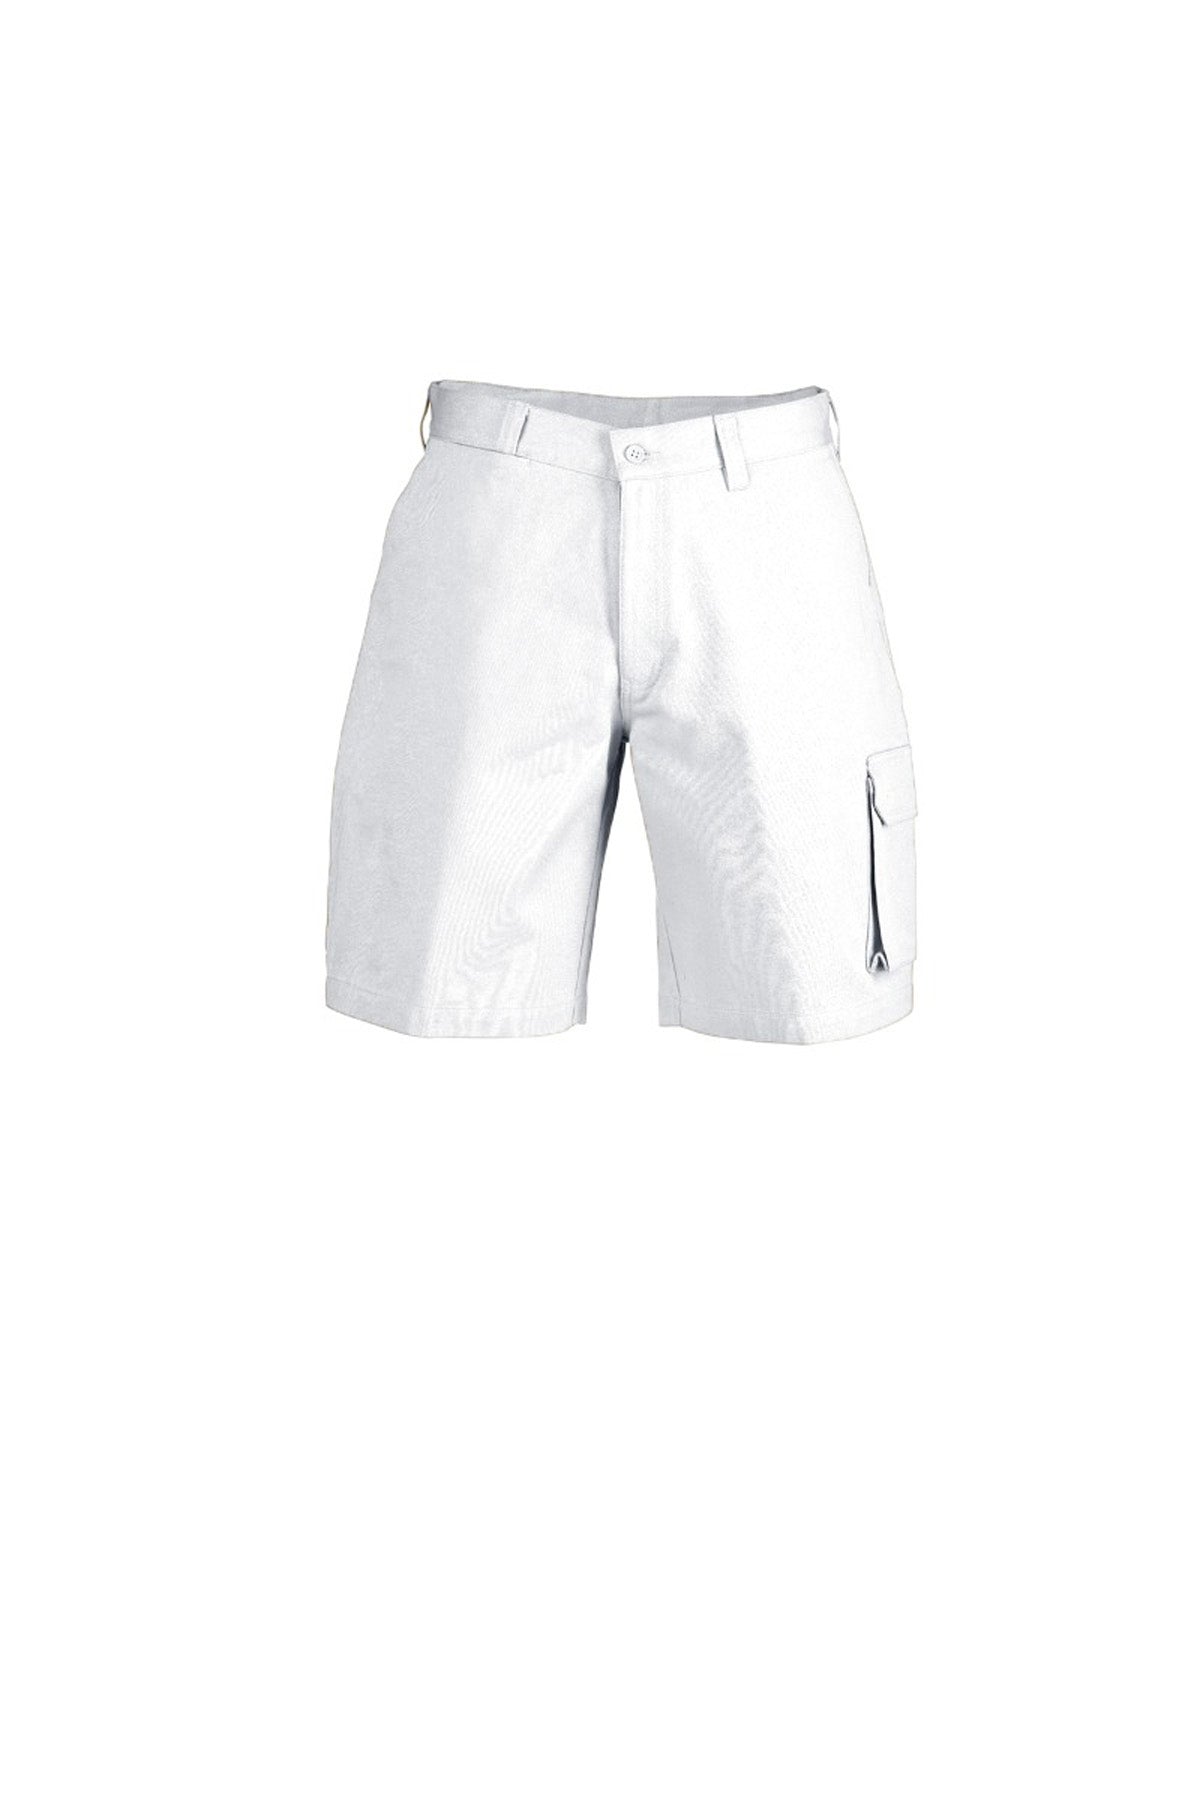 Cargo Cotton Drill Shorts - made by Workcraft